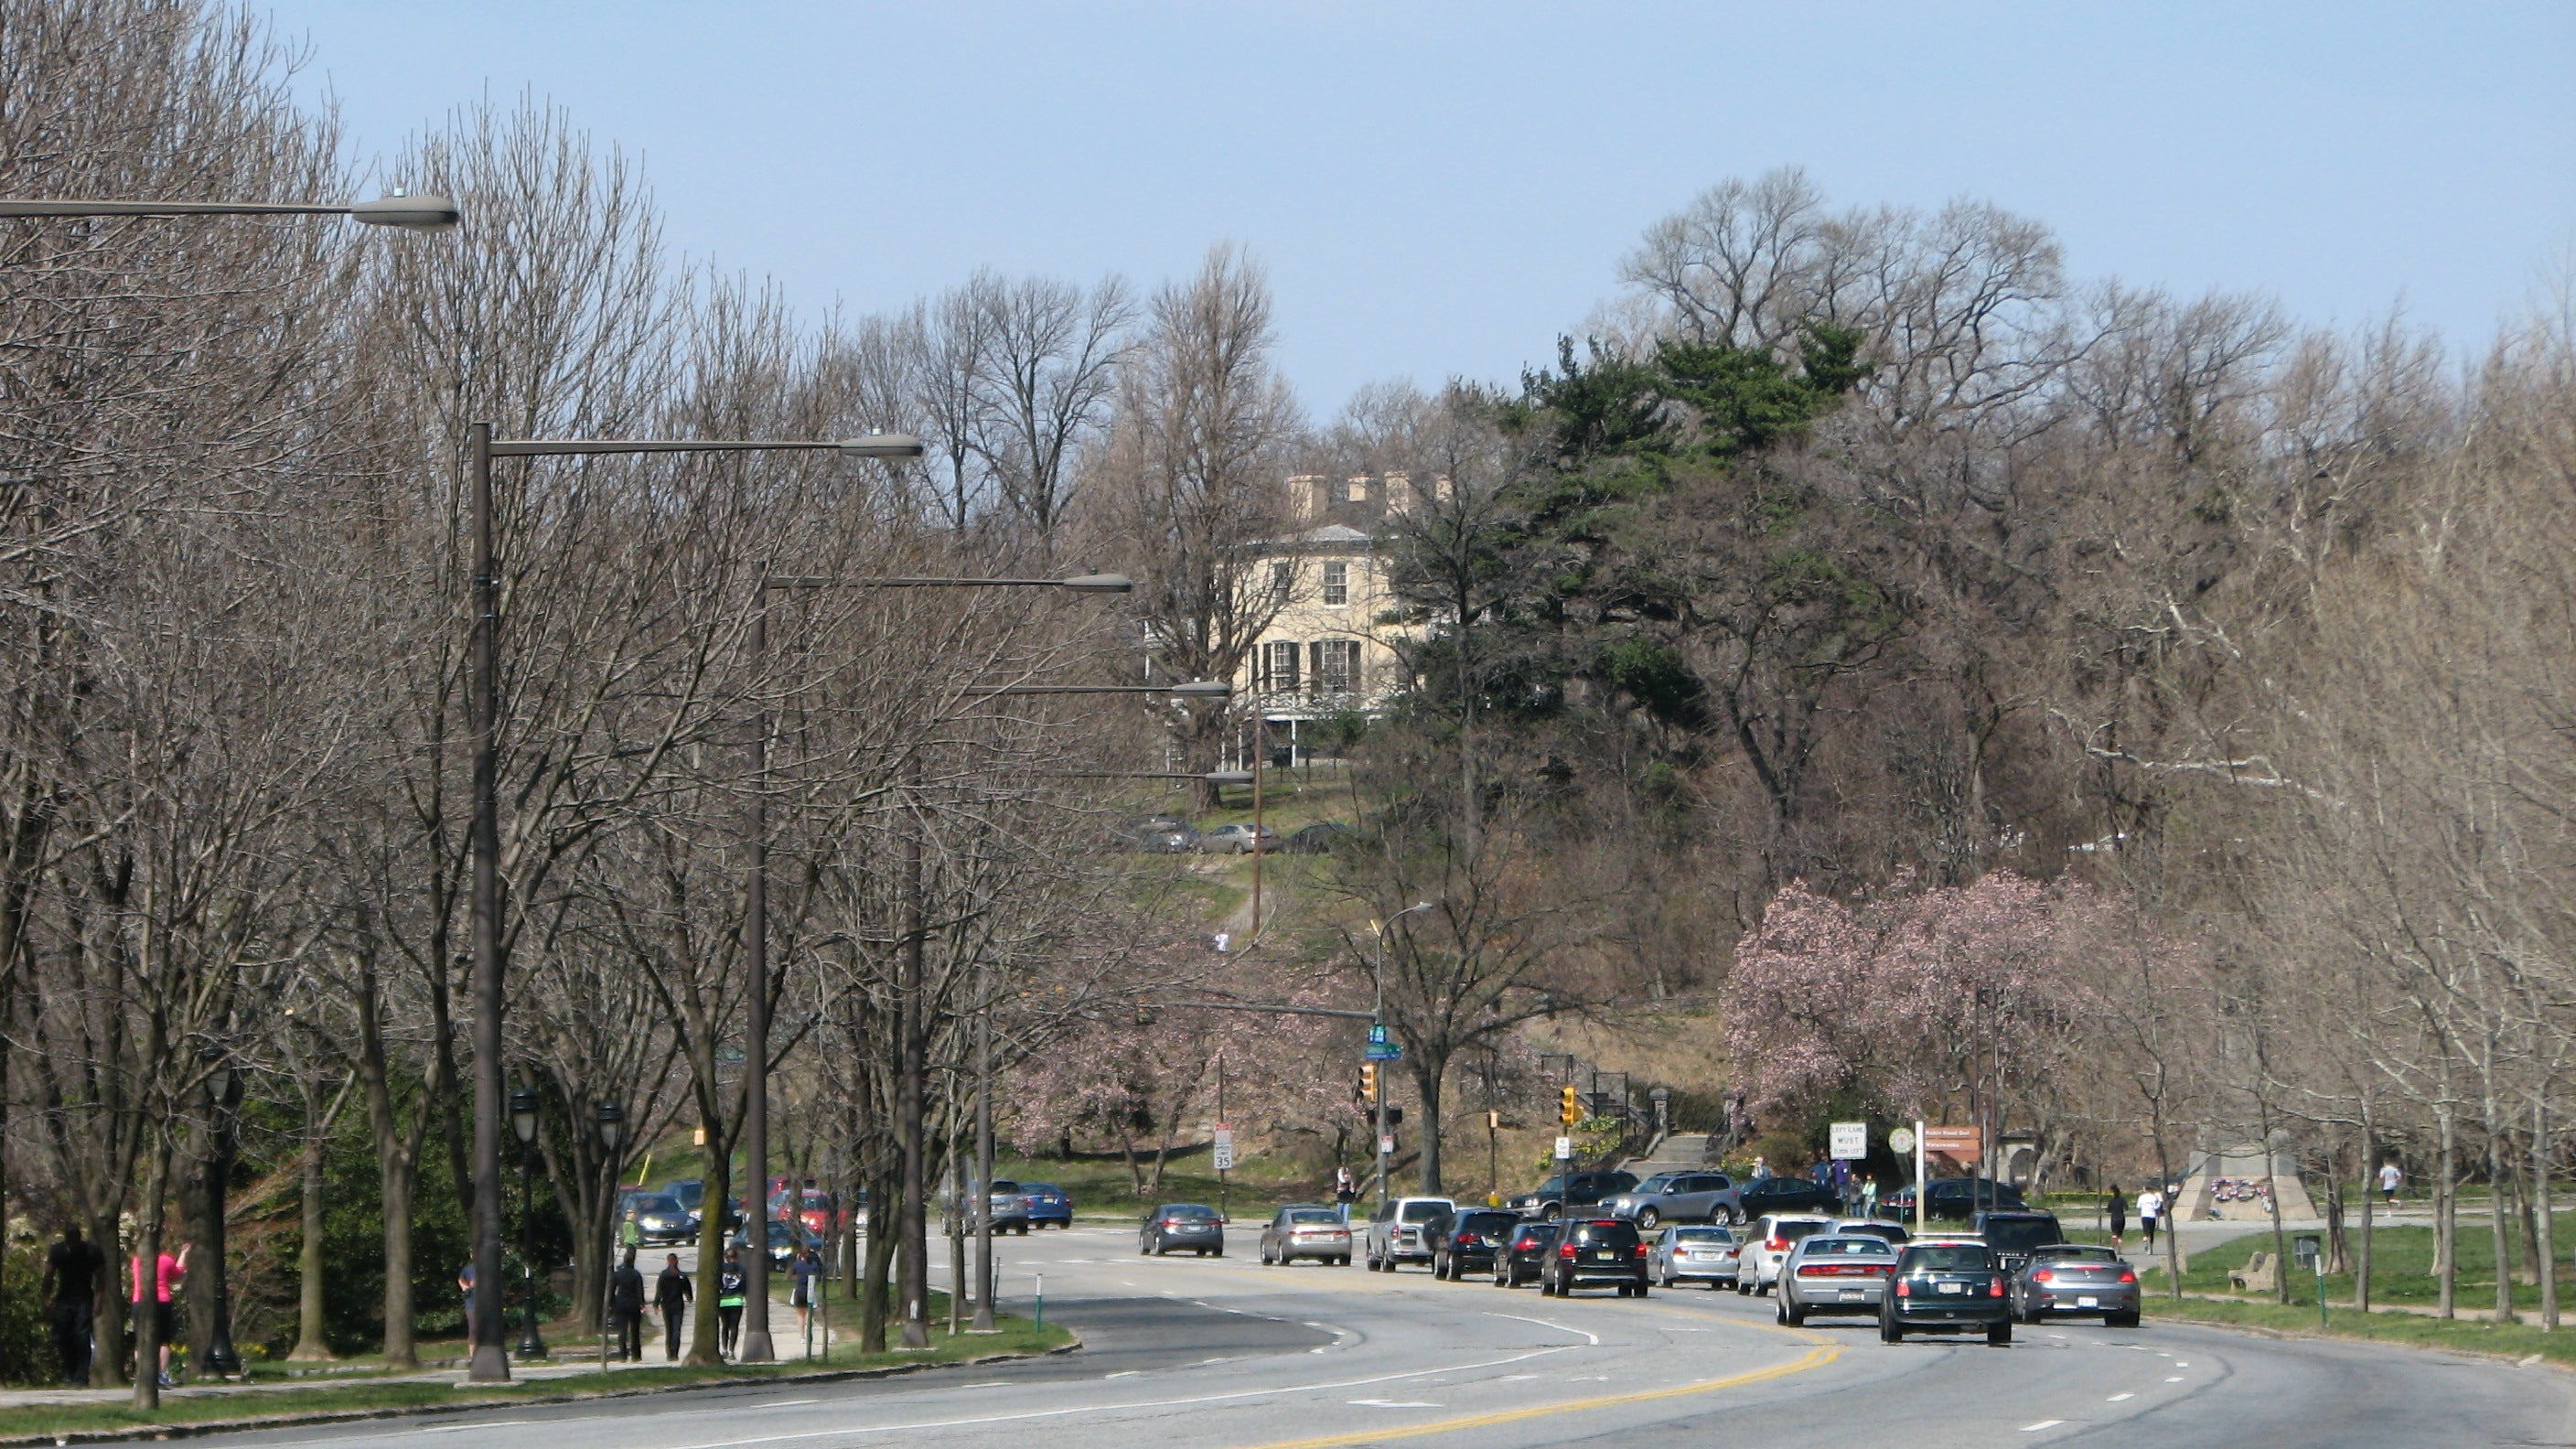 The Federal-style house can be seen from the top of Kelly Drive.